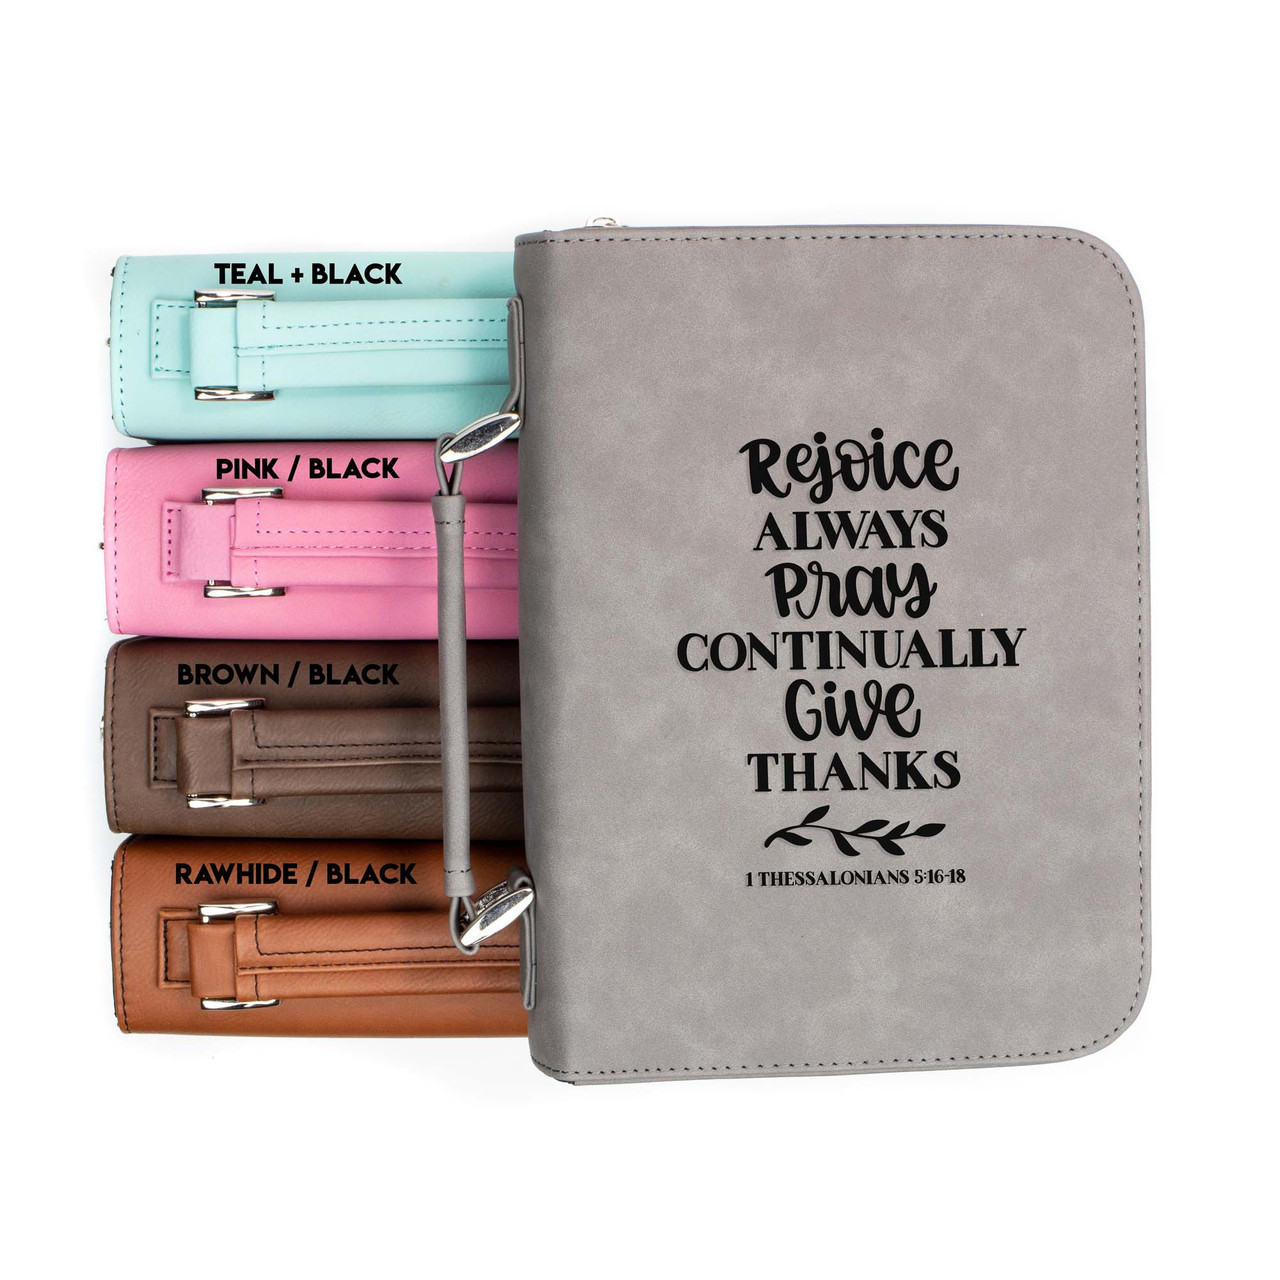 Rejoice Pray Give 1 Thessalonians 5-16-18 Faux Leather Bible Cover